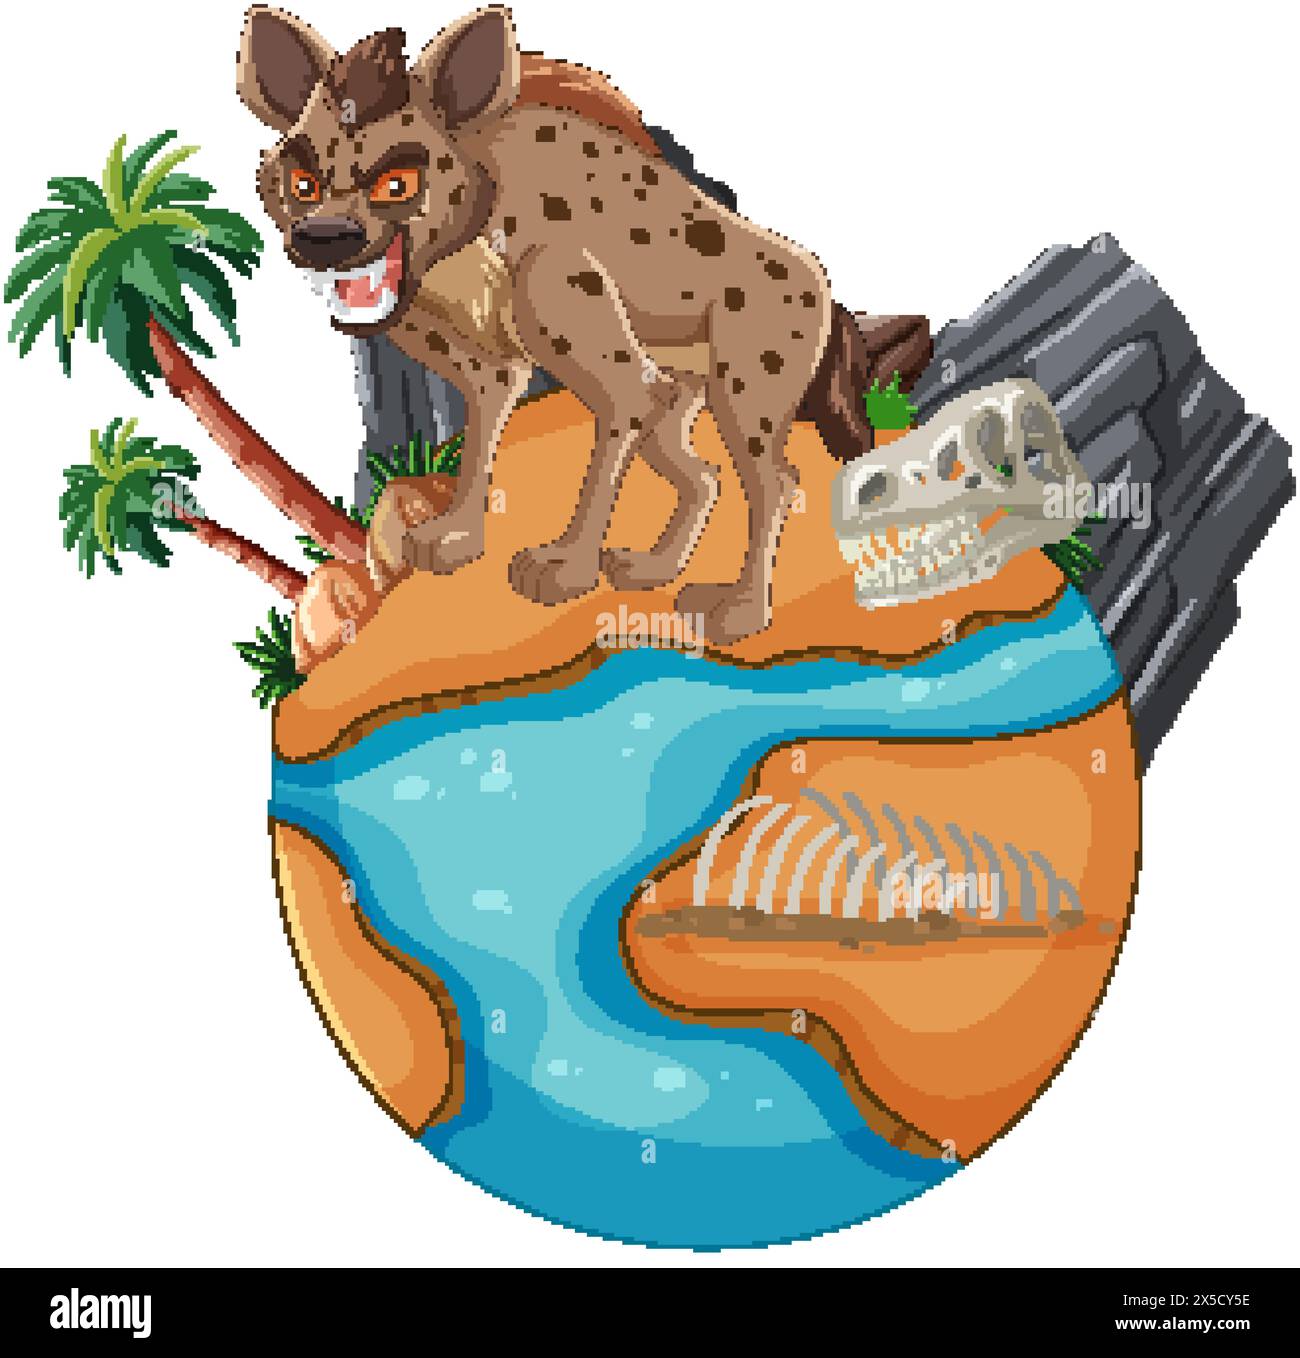 Illustration of hyena atop a globe with natural elements Stock Vector